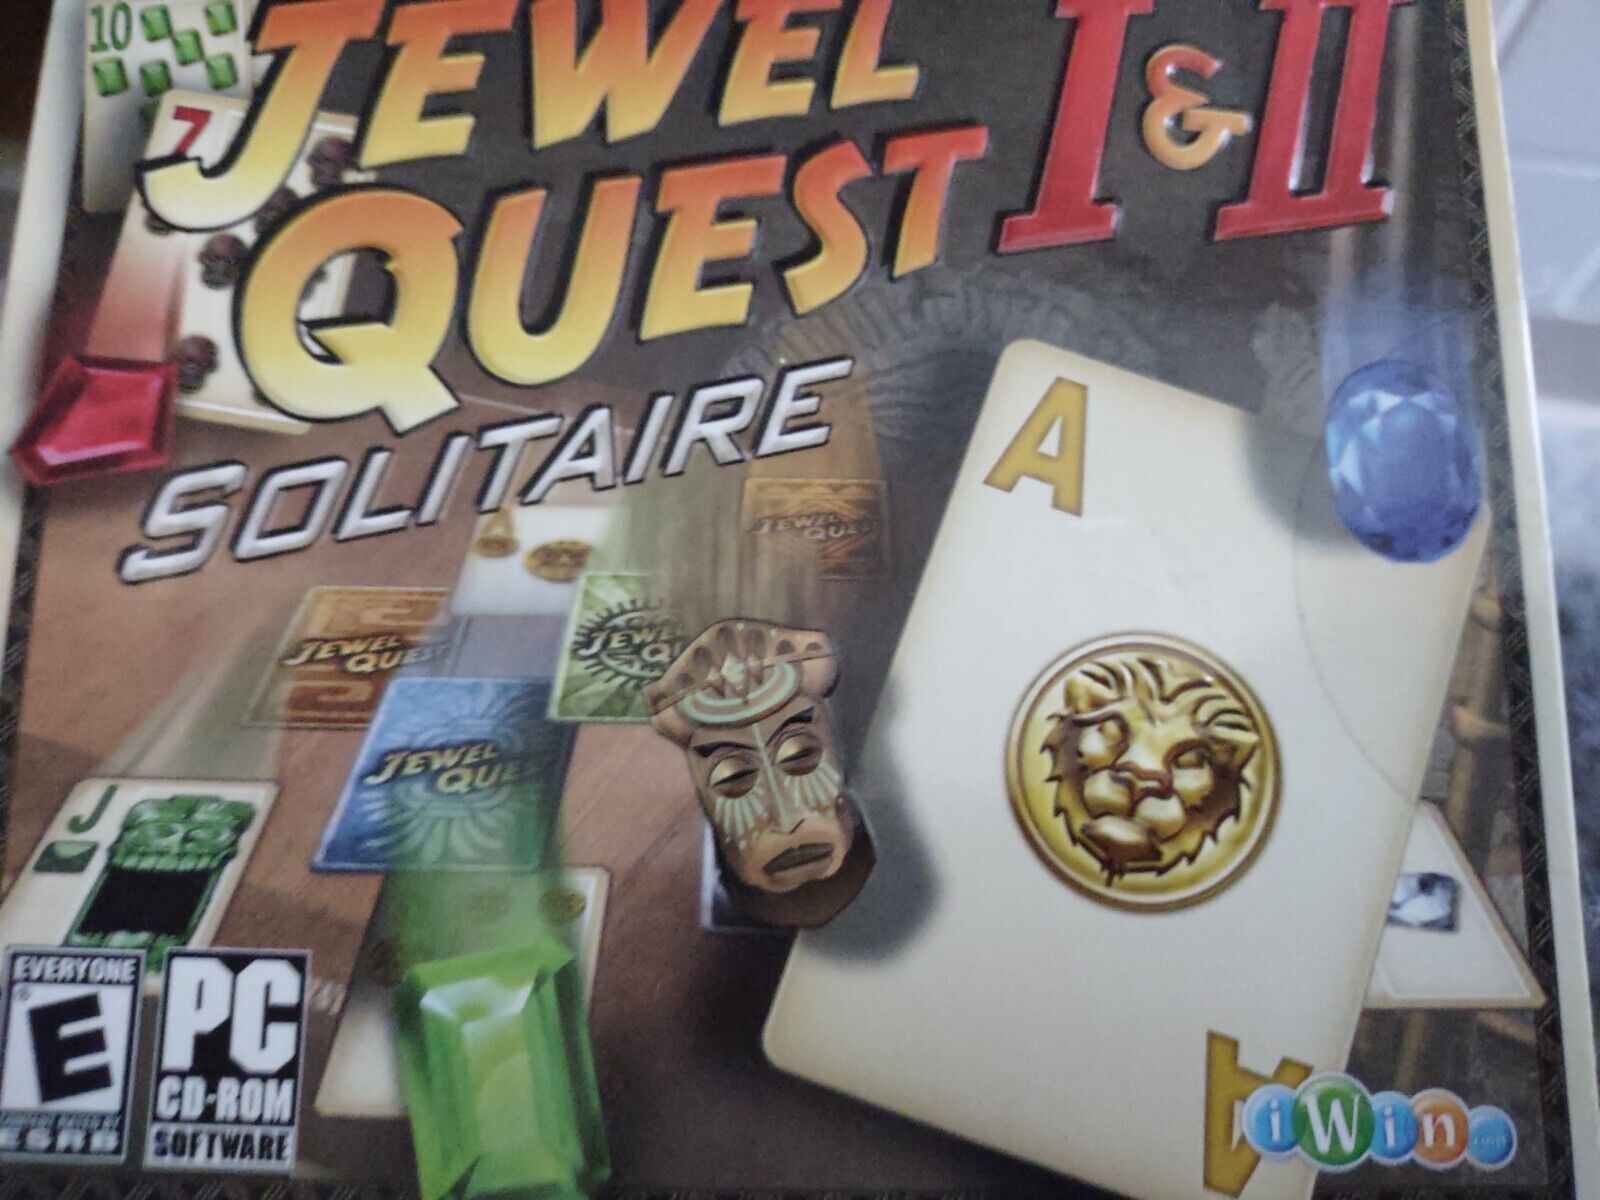 Jewel Quest I & II Solitaire PC Rom Software CD